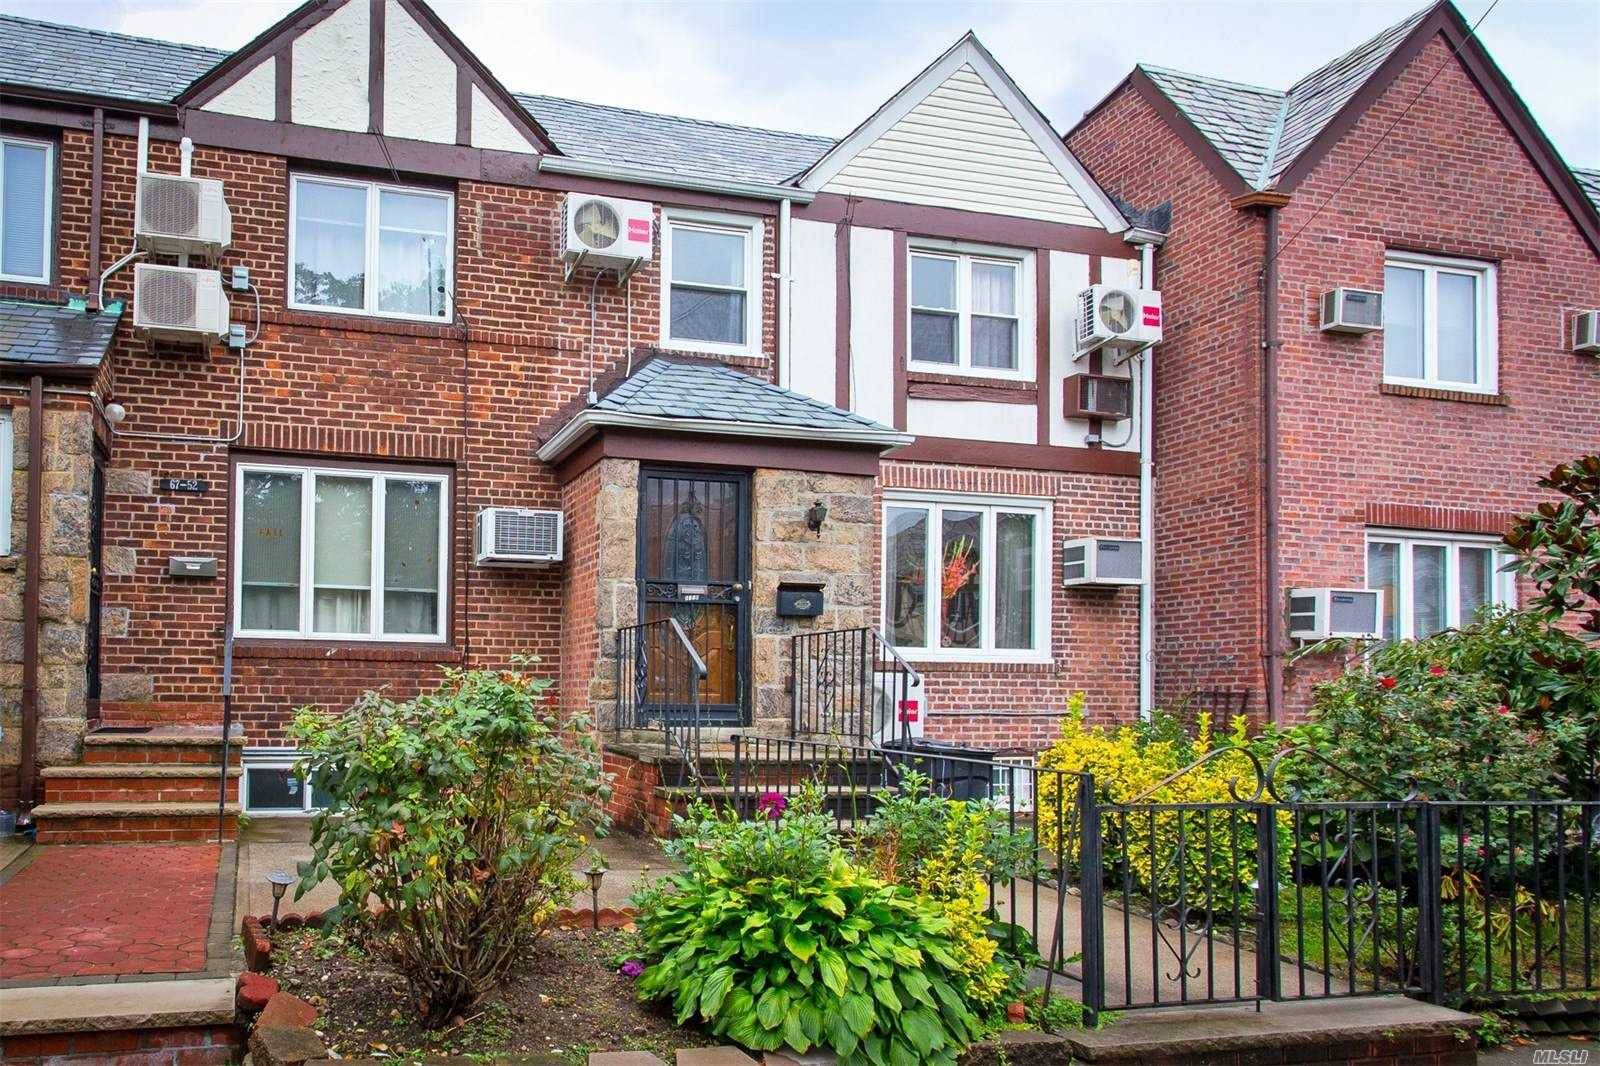 3 BR House Forest Hills LIC / Queens